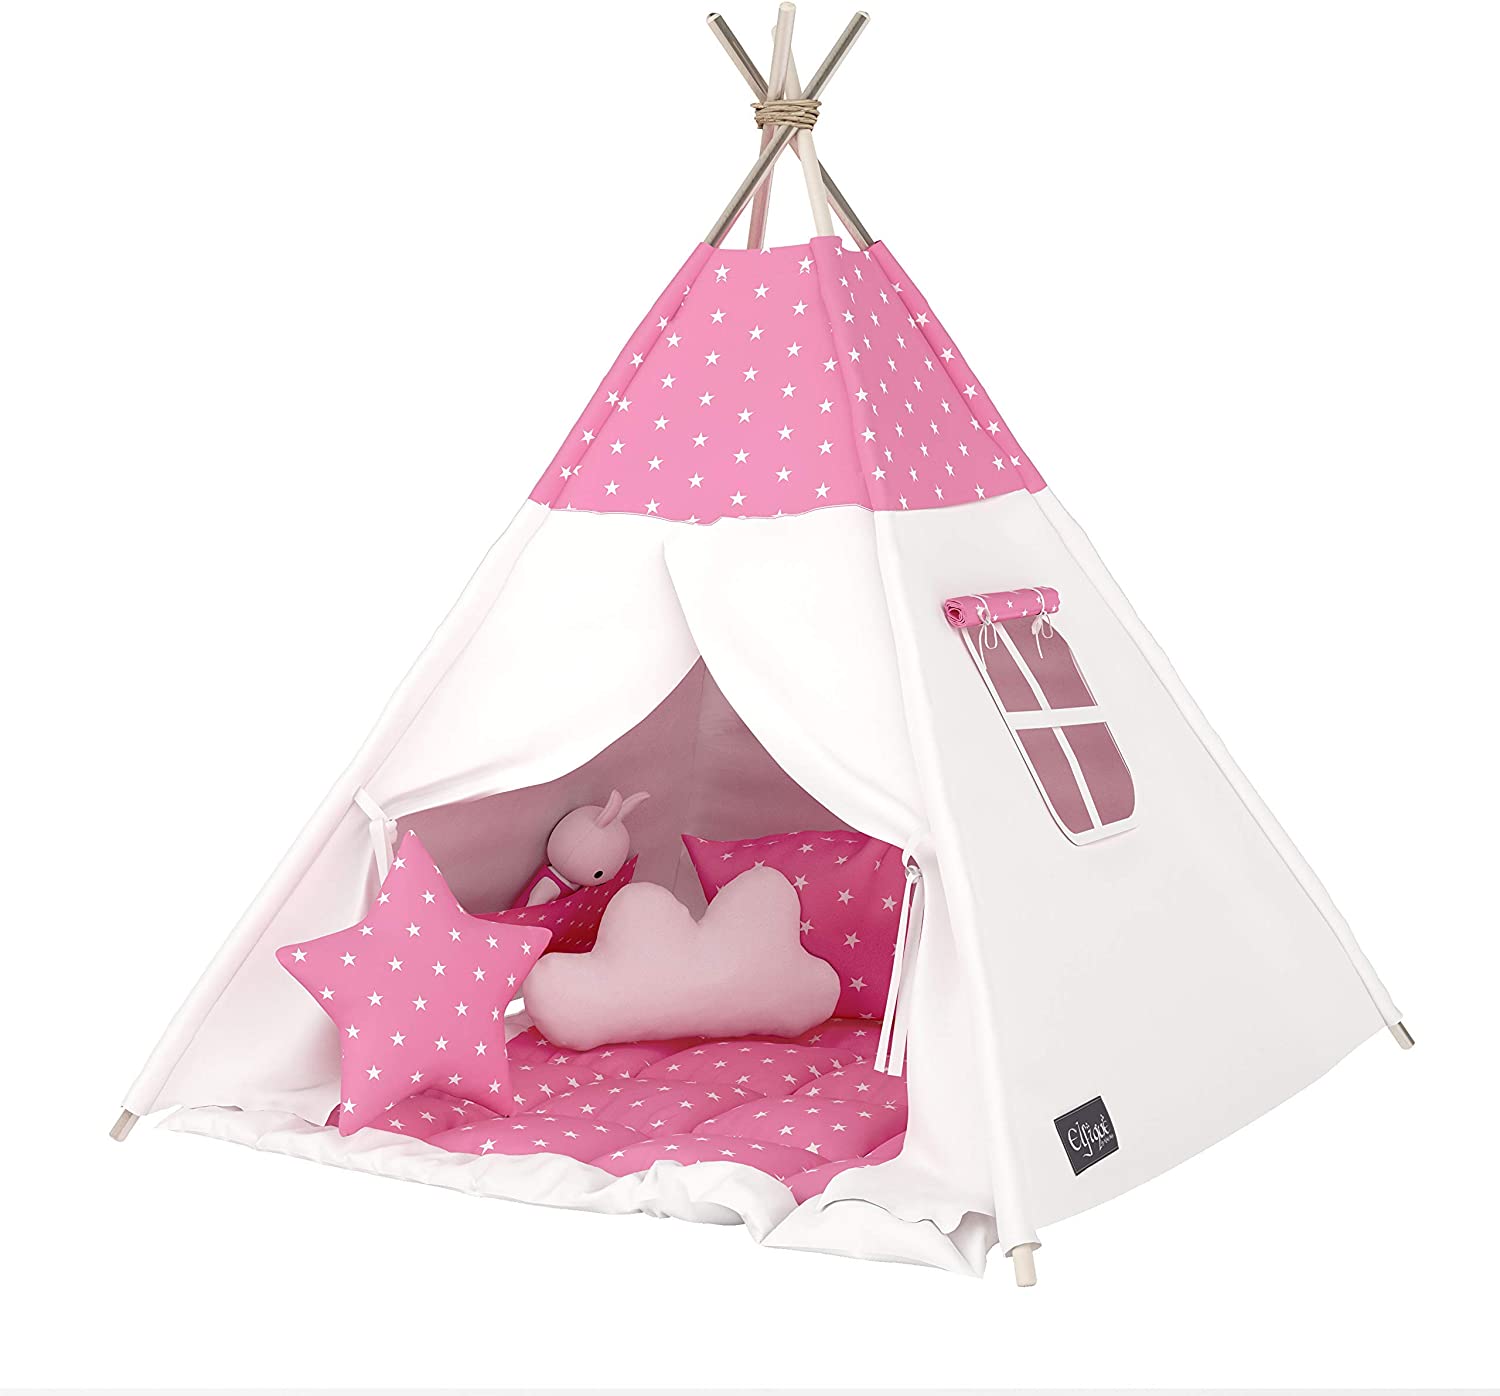 Elfique new Tipi Indian Tent play Tent Double Padded Blanket (Tent with Bla